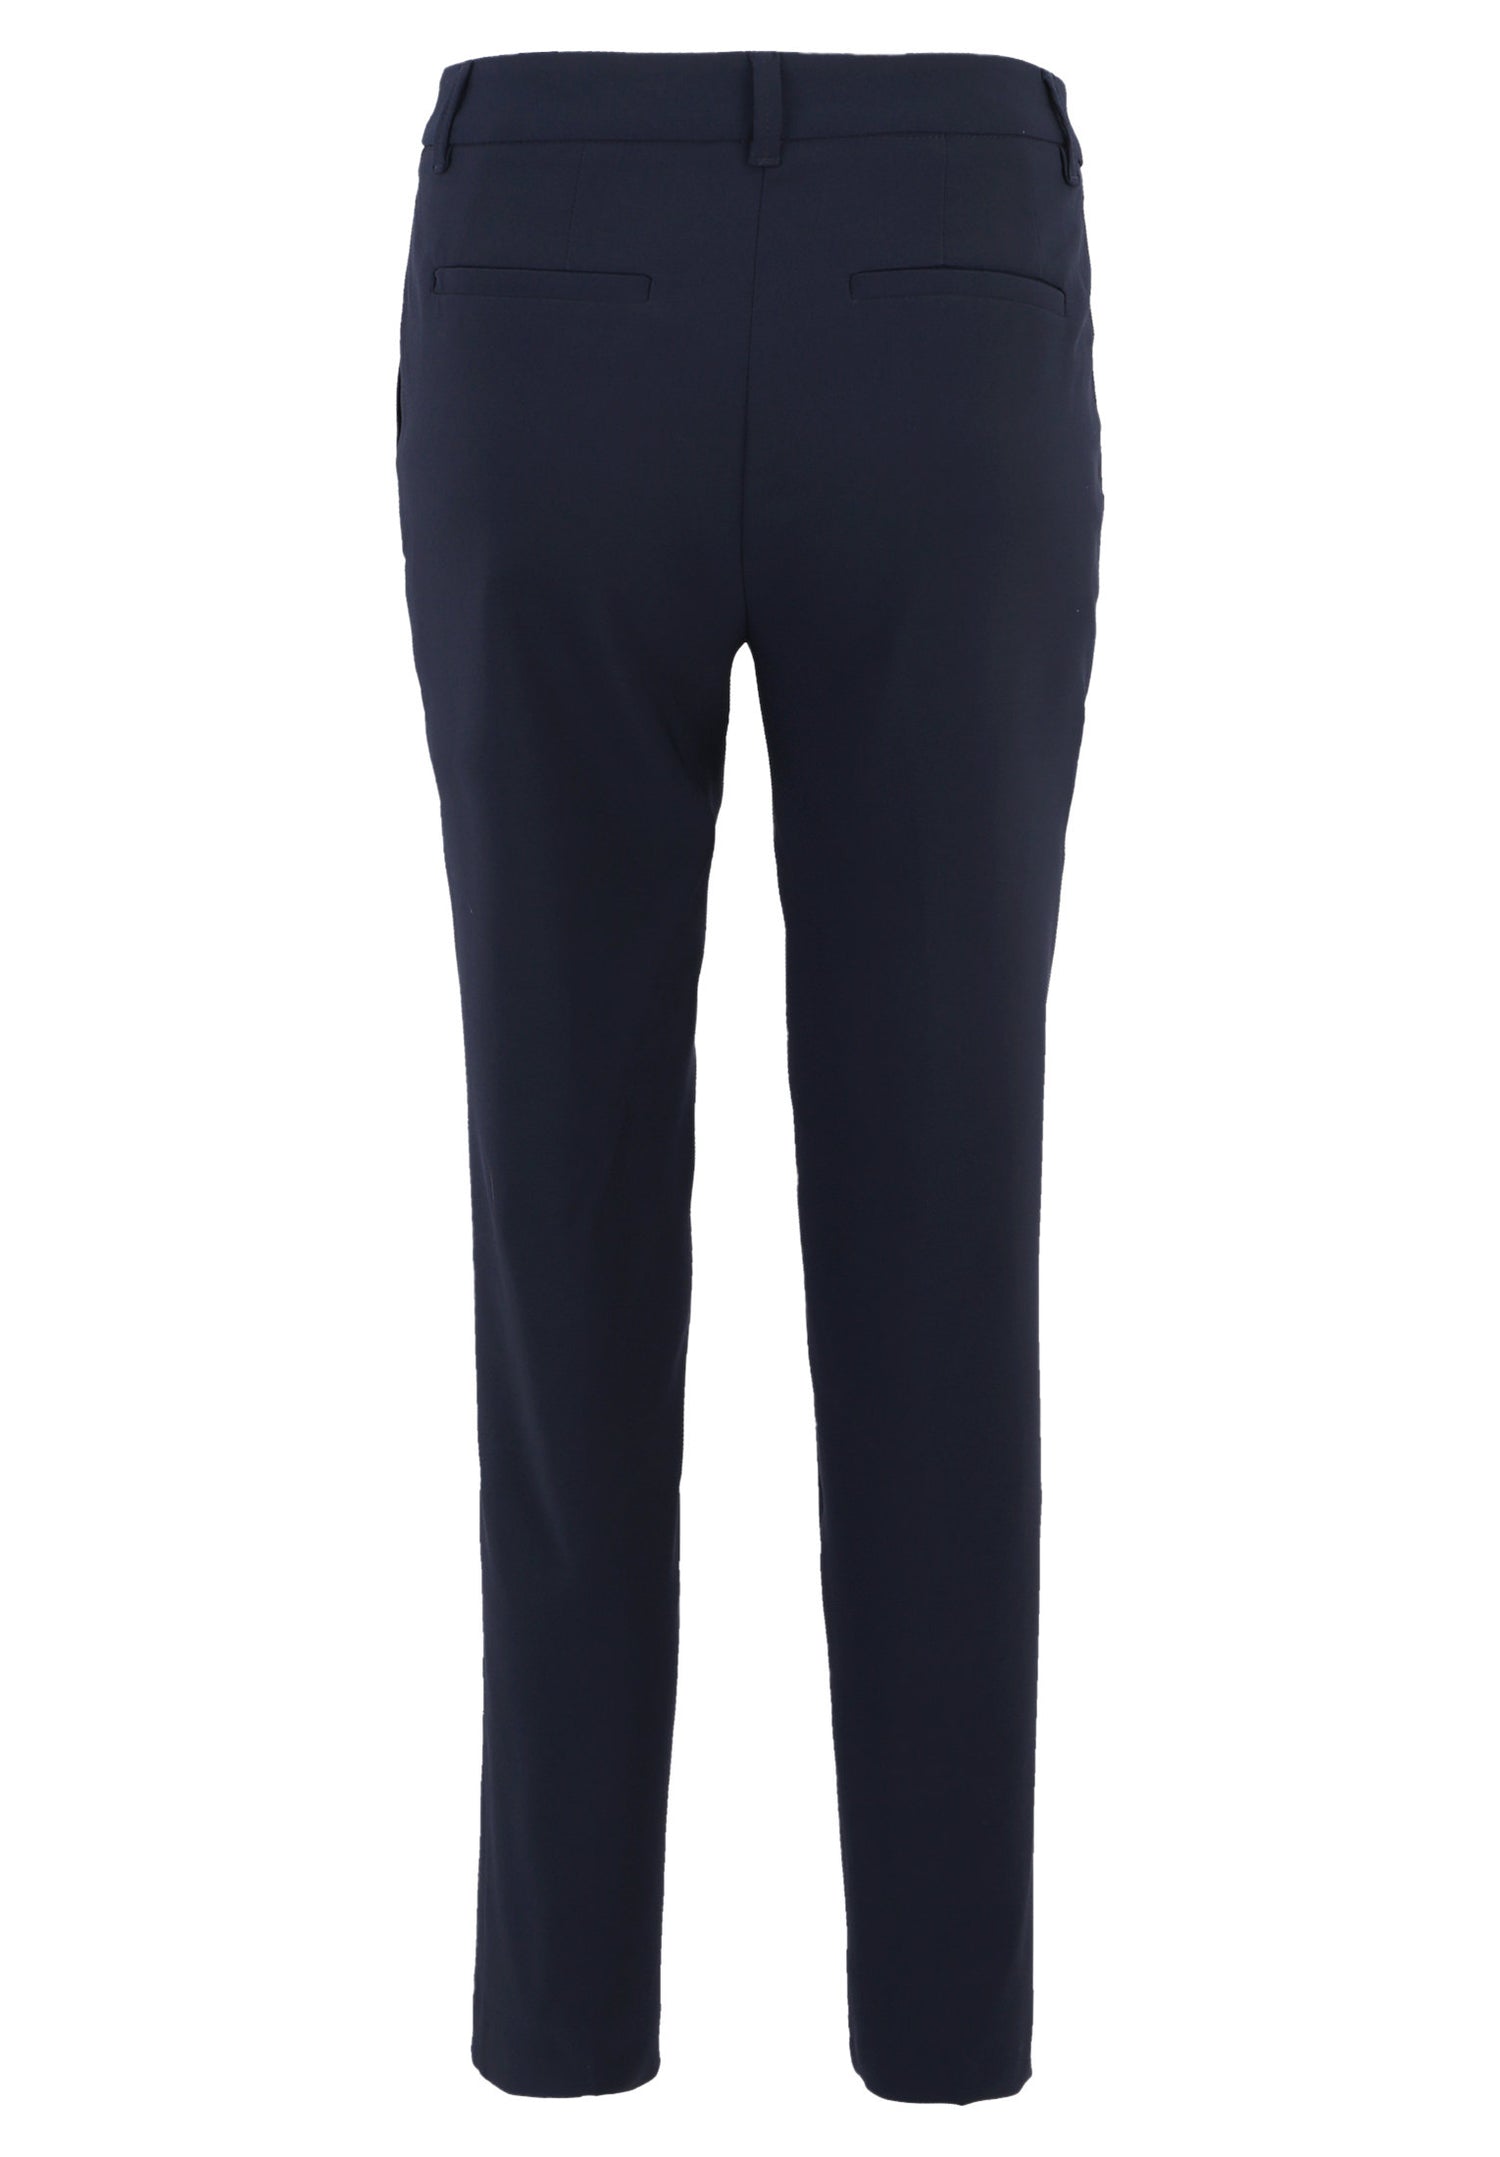 Business Trousers
With Crease_6002-1080_8345_03